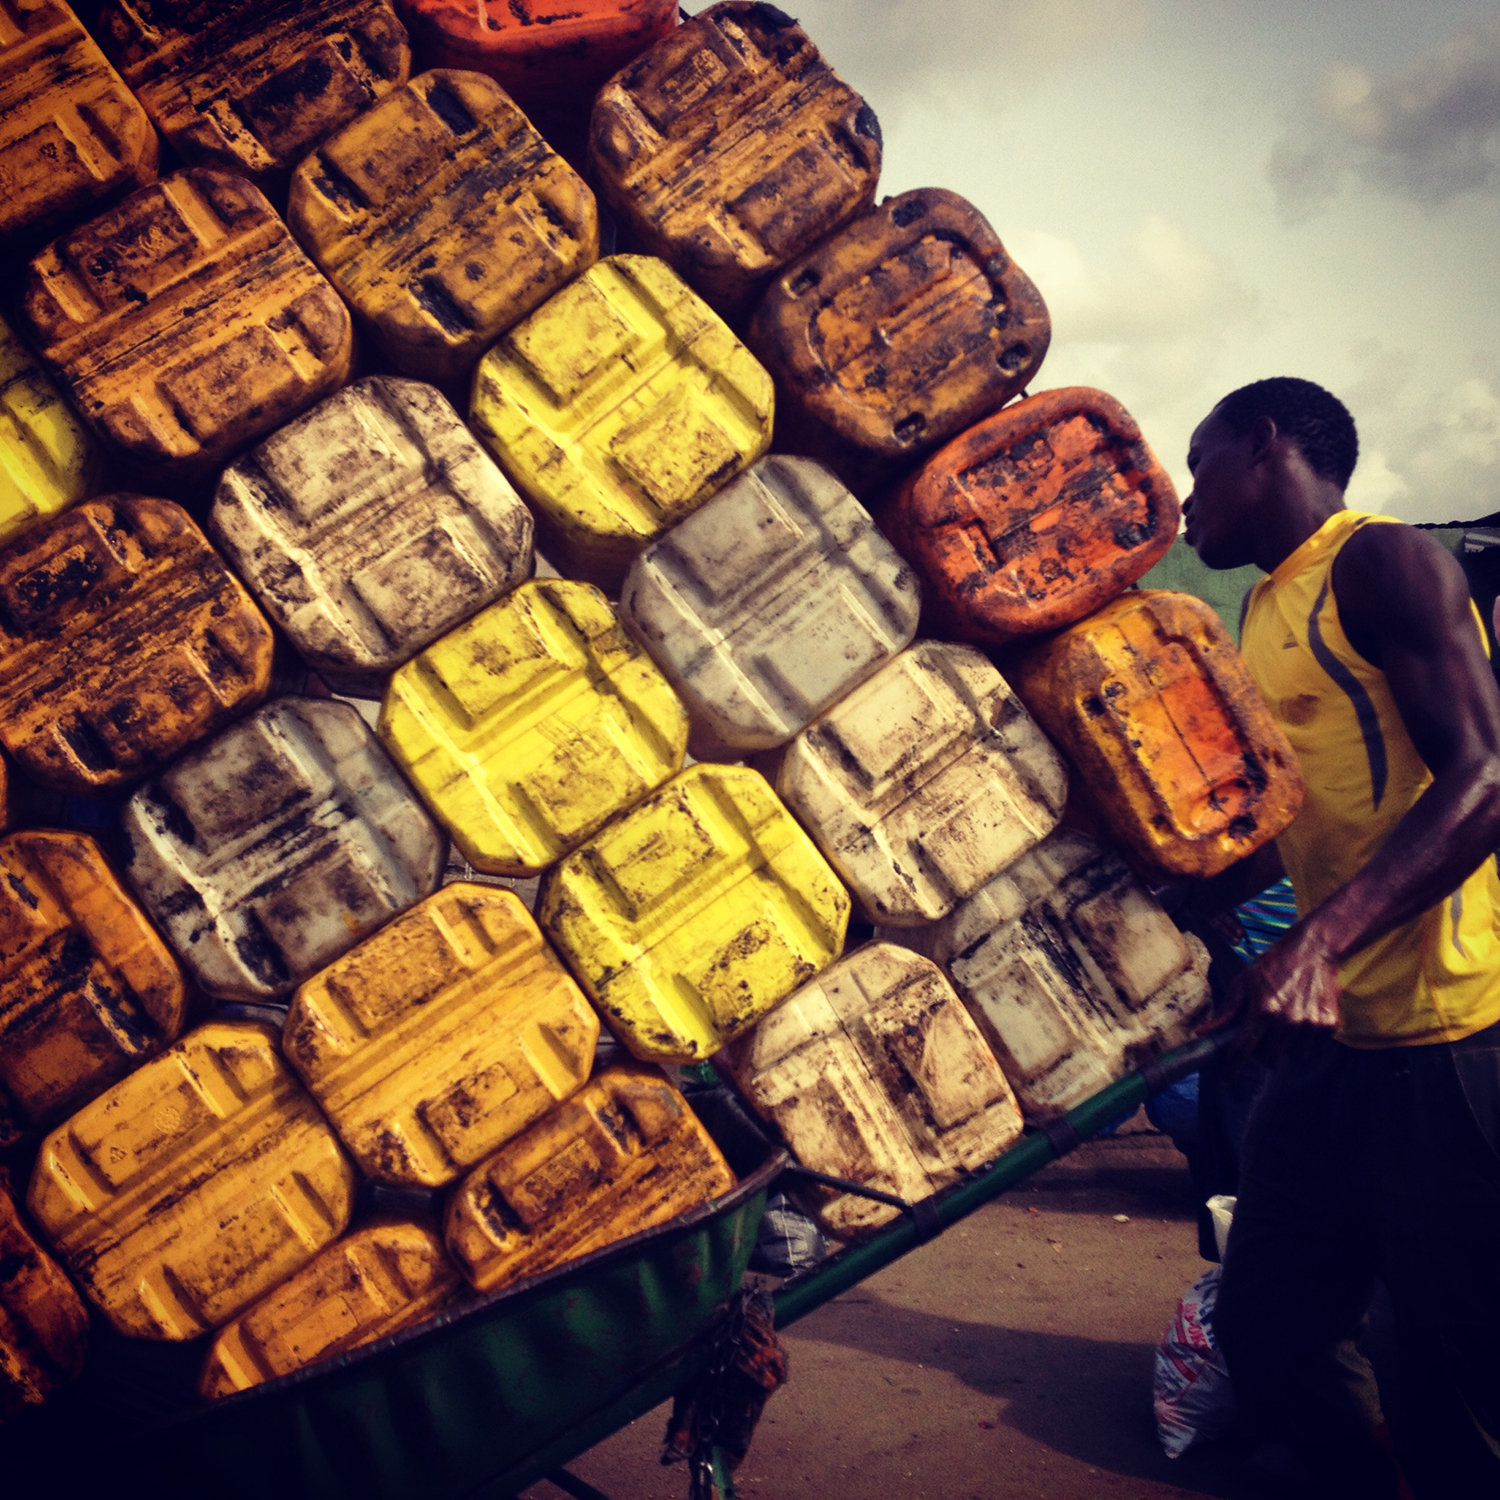 Apr. 6, 2014. Lagos hustle: pushing plastic cans of palm oil at Mile 12 market